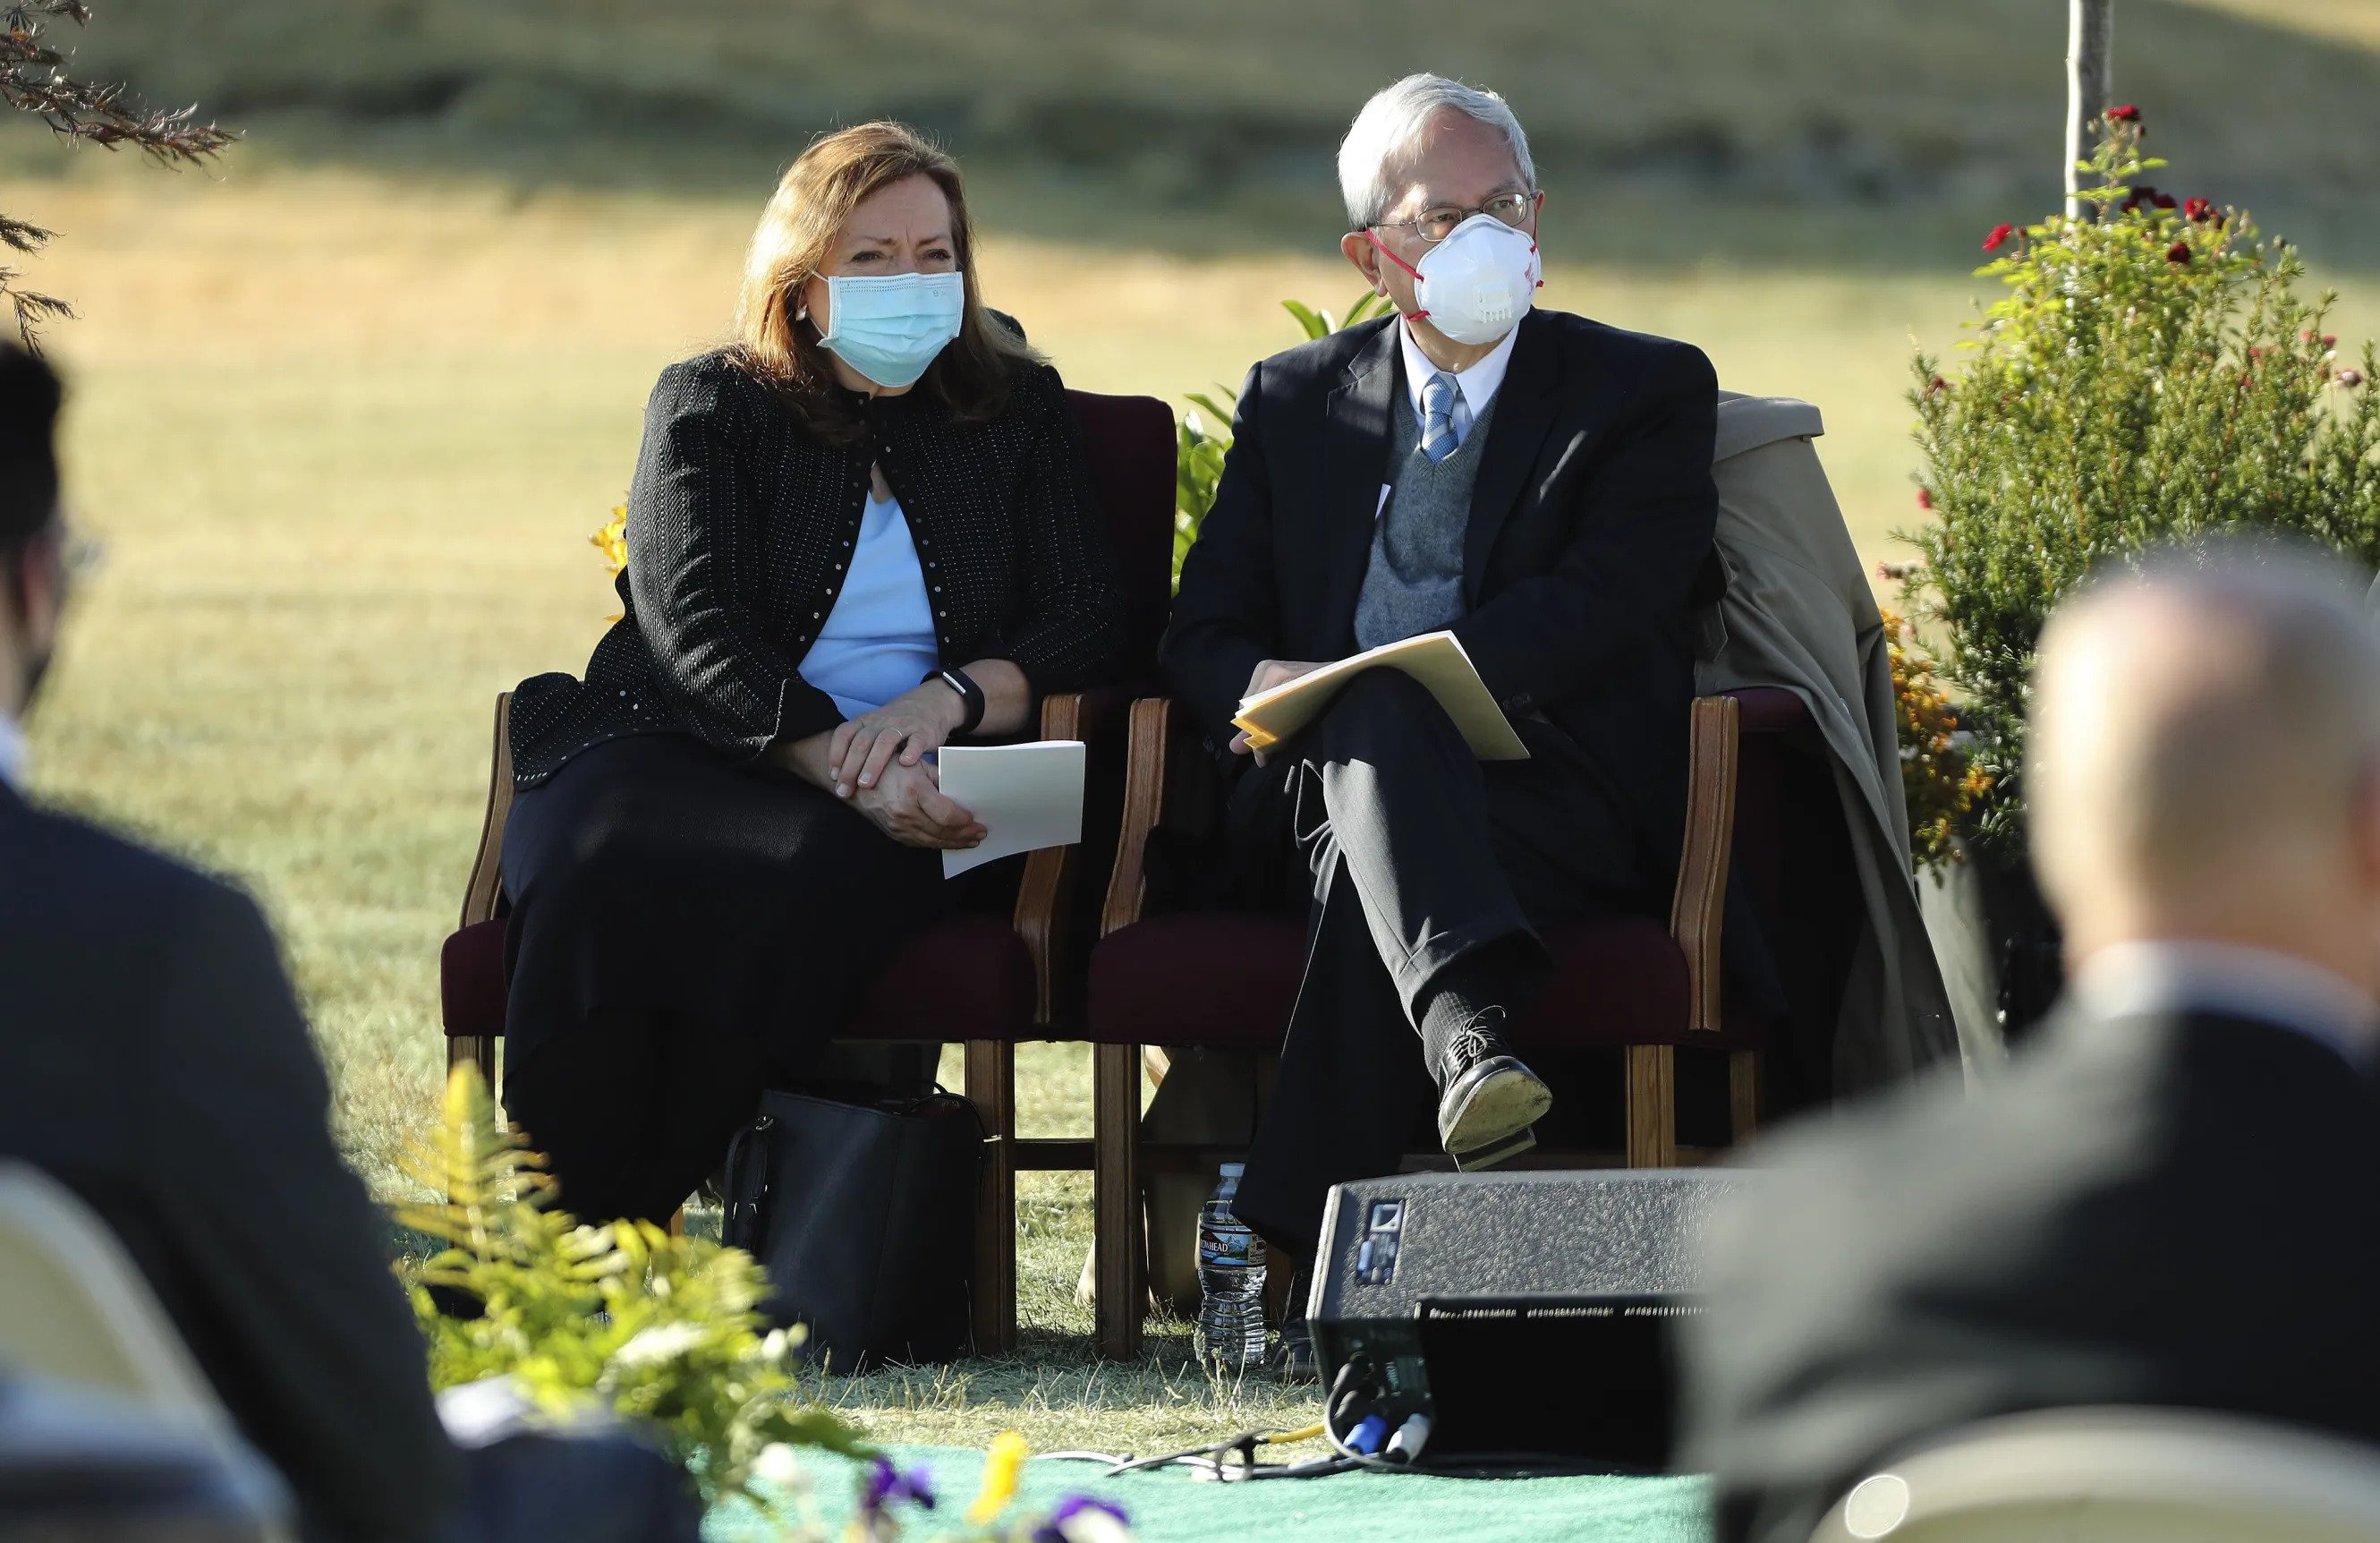 Elder and Sister Gong wearing face masks and sitting next to each other on chairs outside.